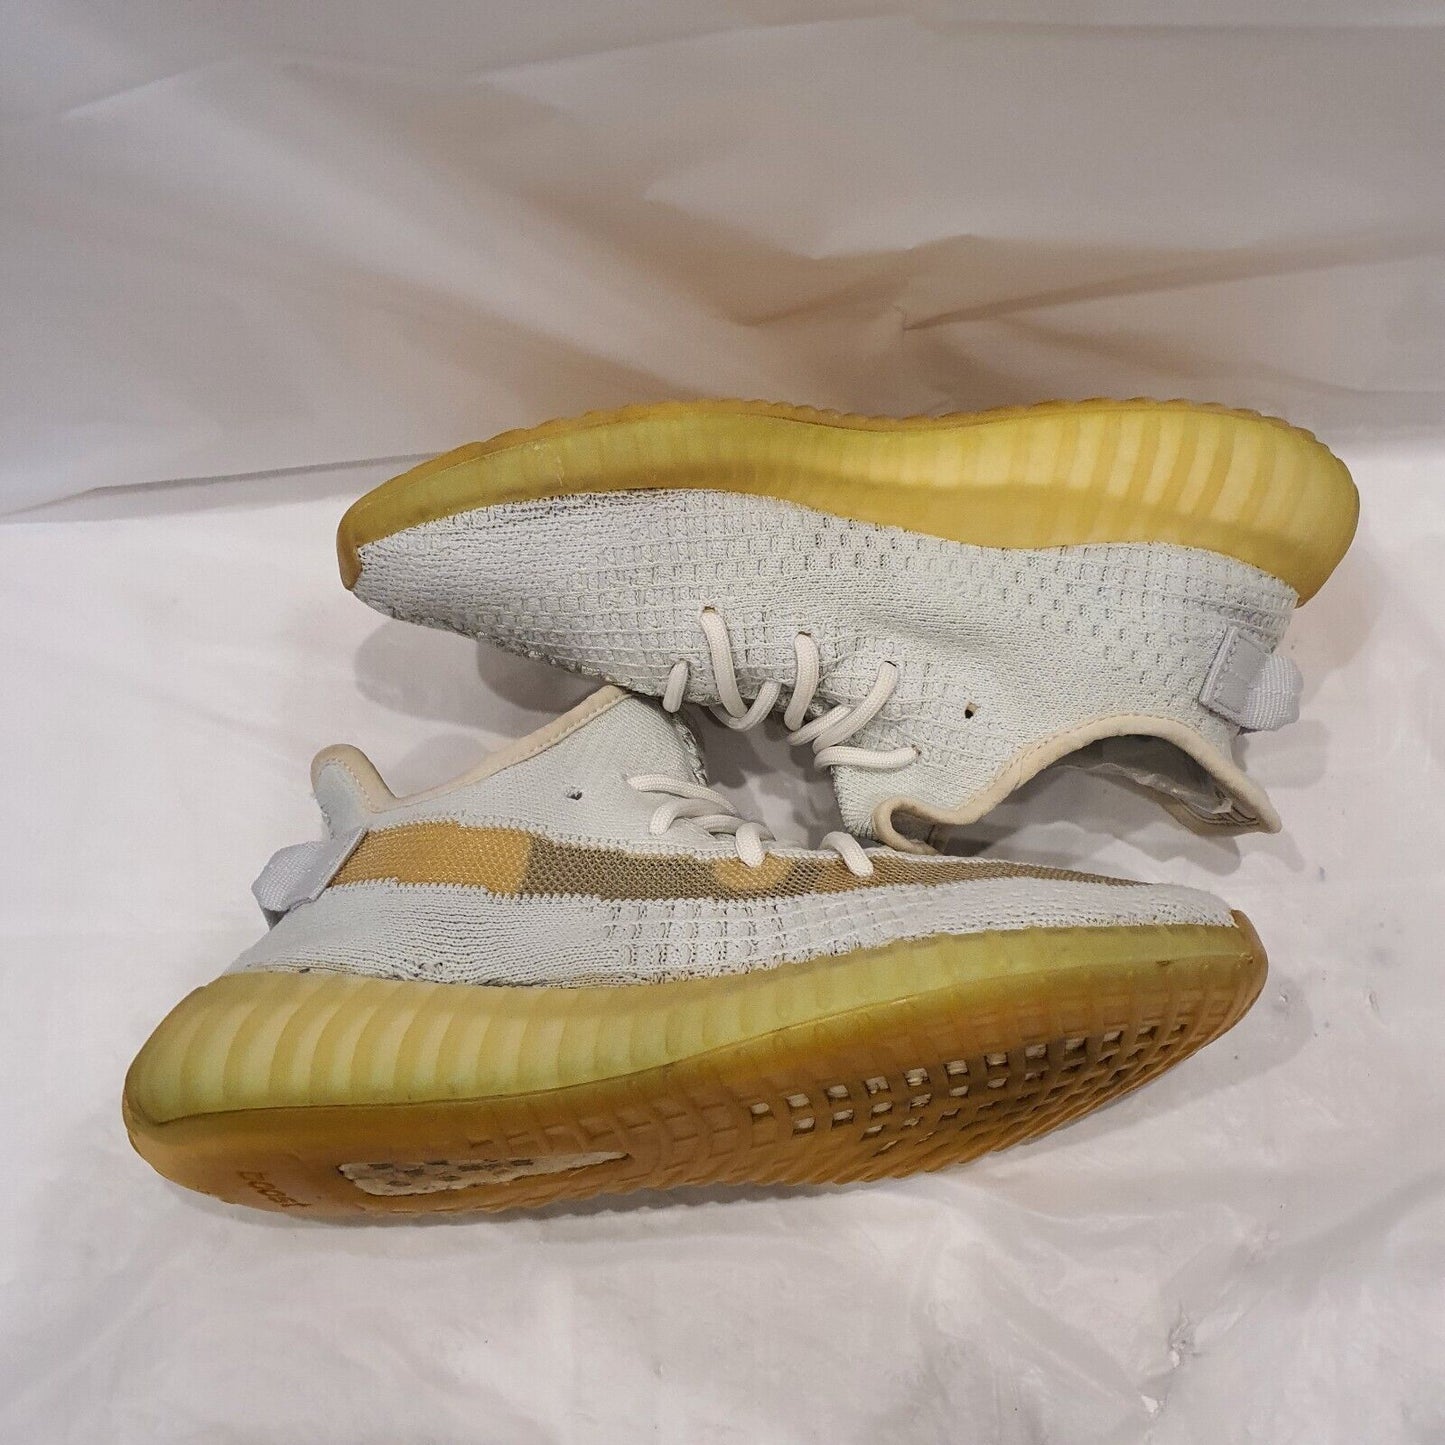 Adidas Yeezy Boost 350 V2 Hyperspace US Men 8.5